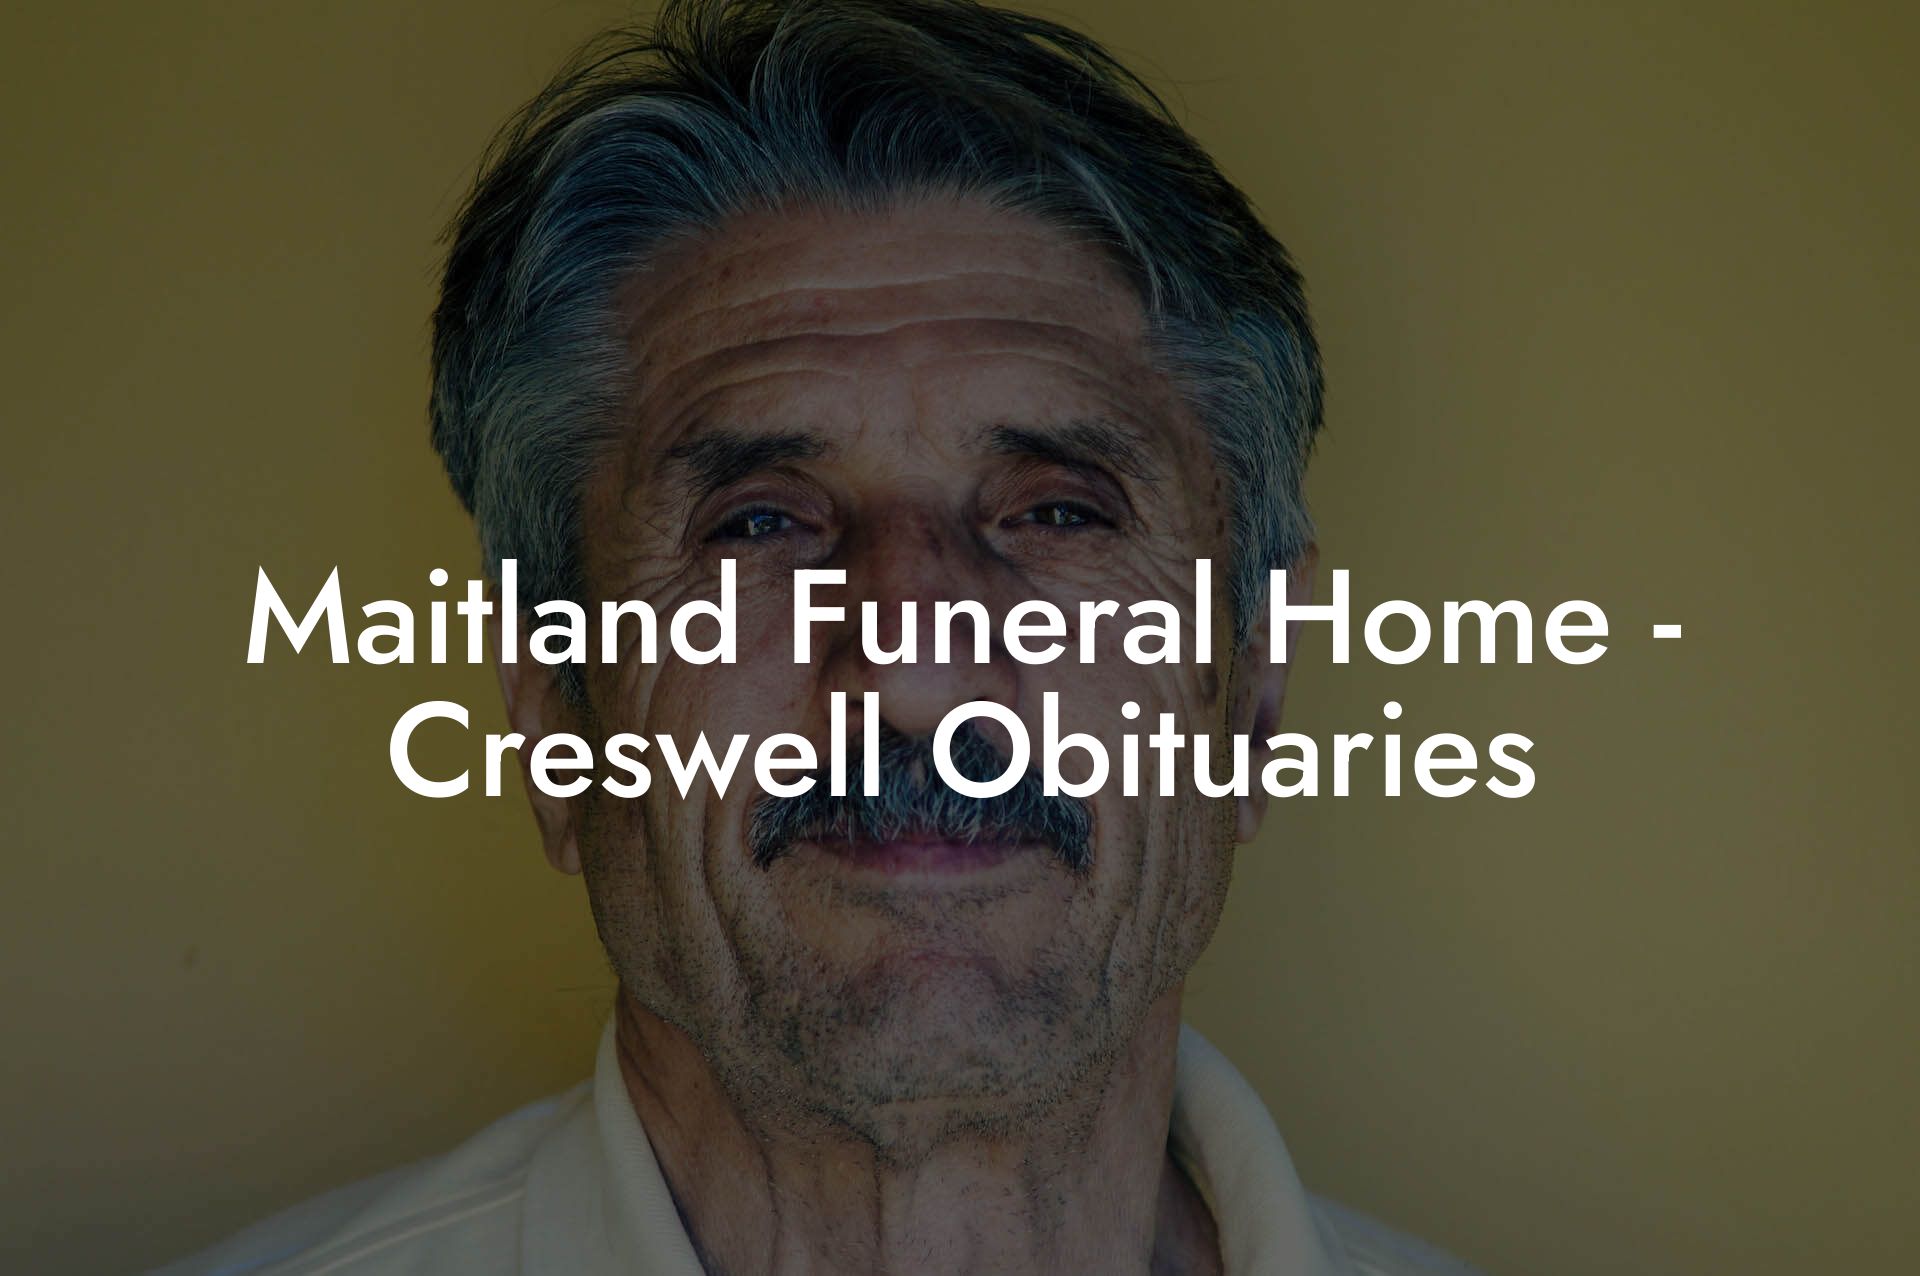 Maitland Funeral Home - Creswell Obituaries